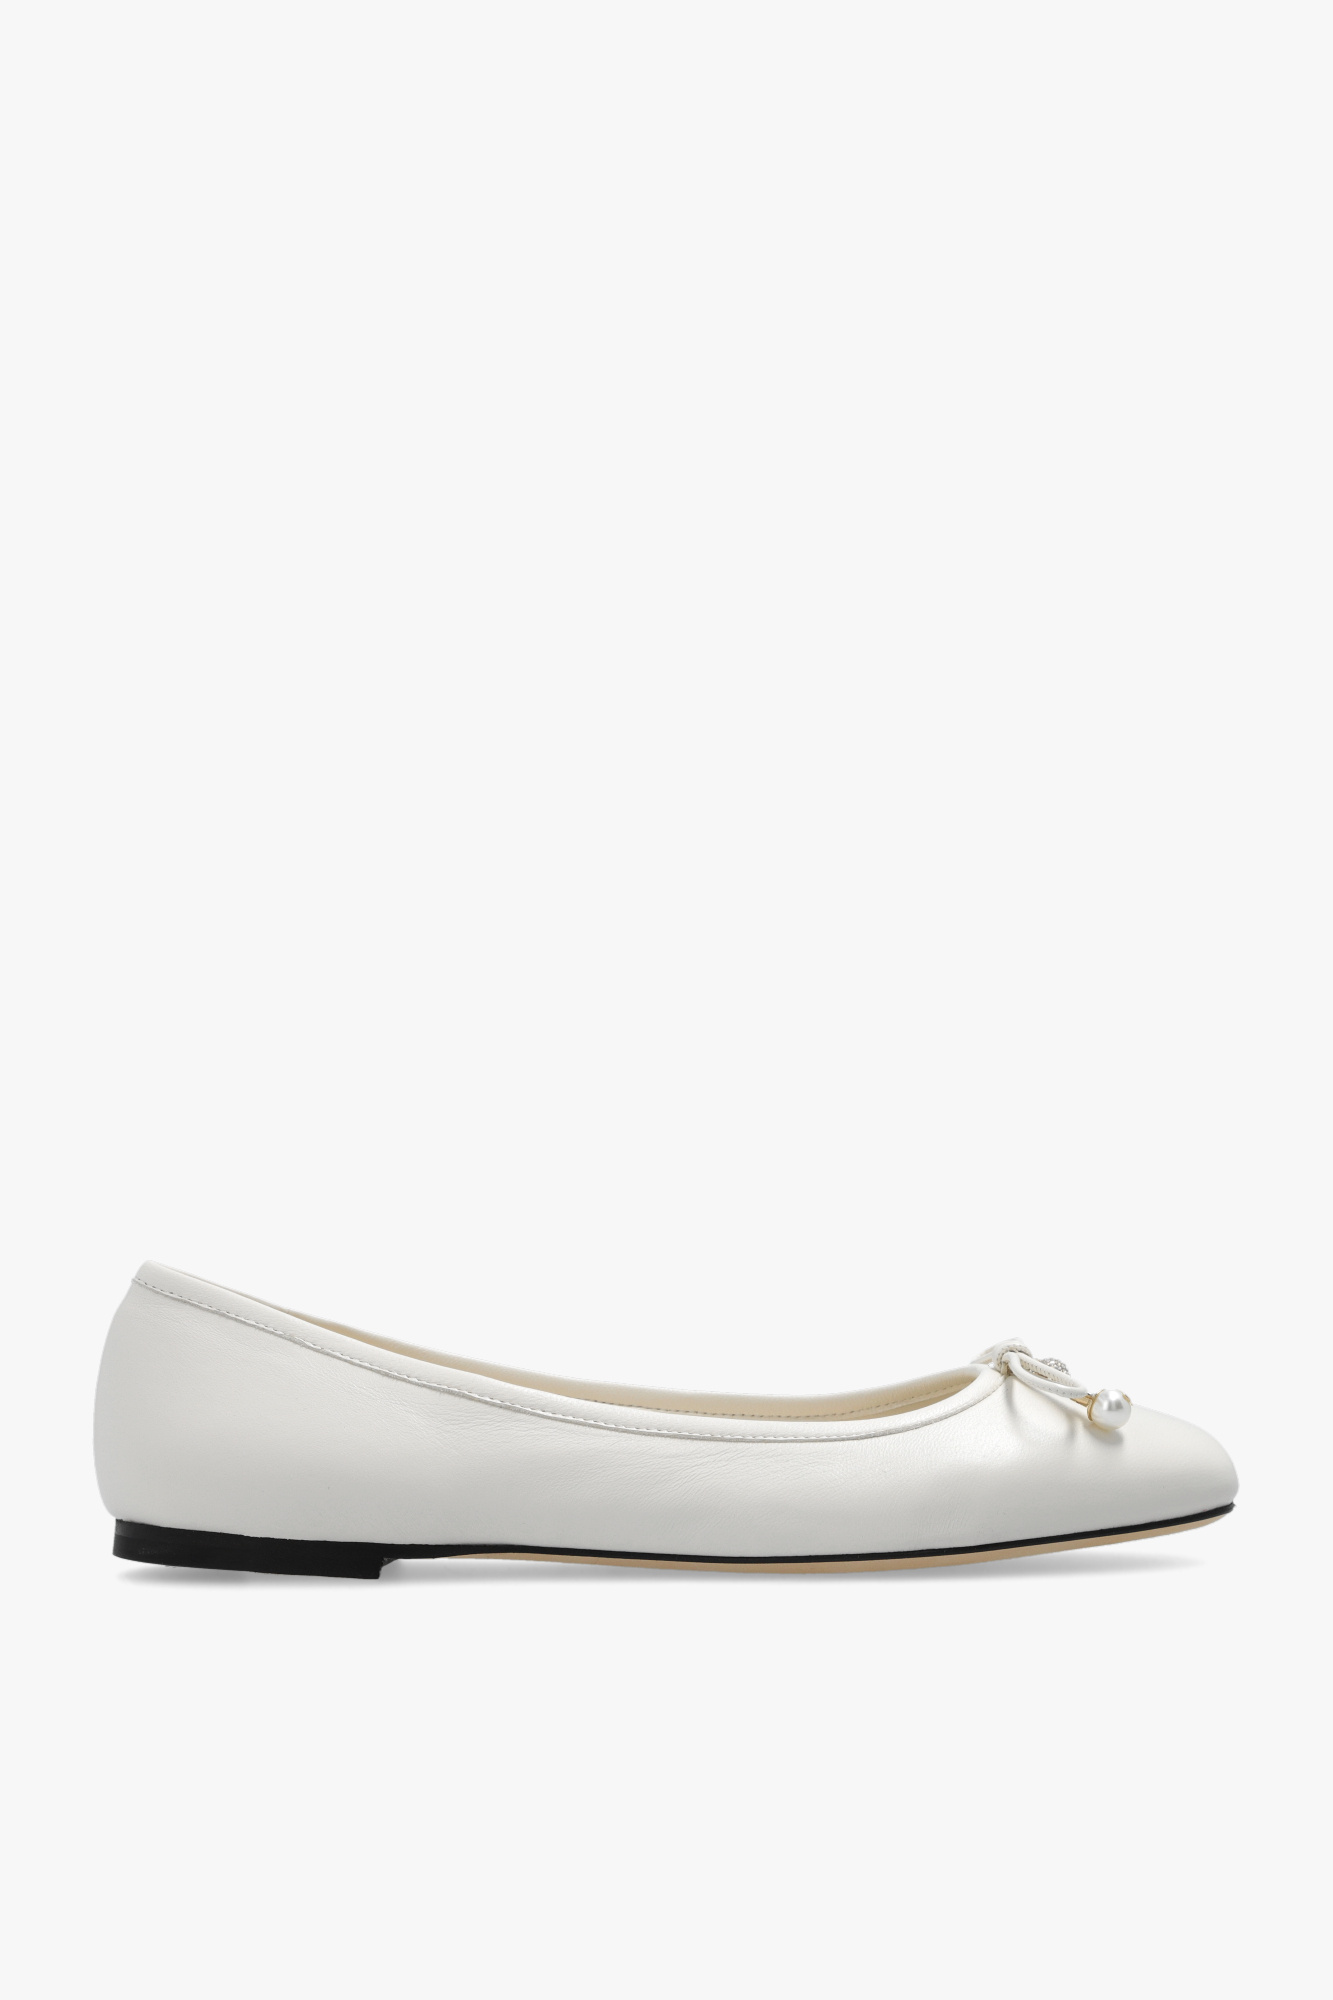 Shop Jimmy Choo Plain Leather Logo Outlet Ballet Shoes by kei224